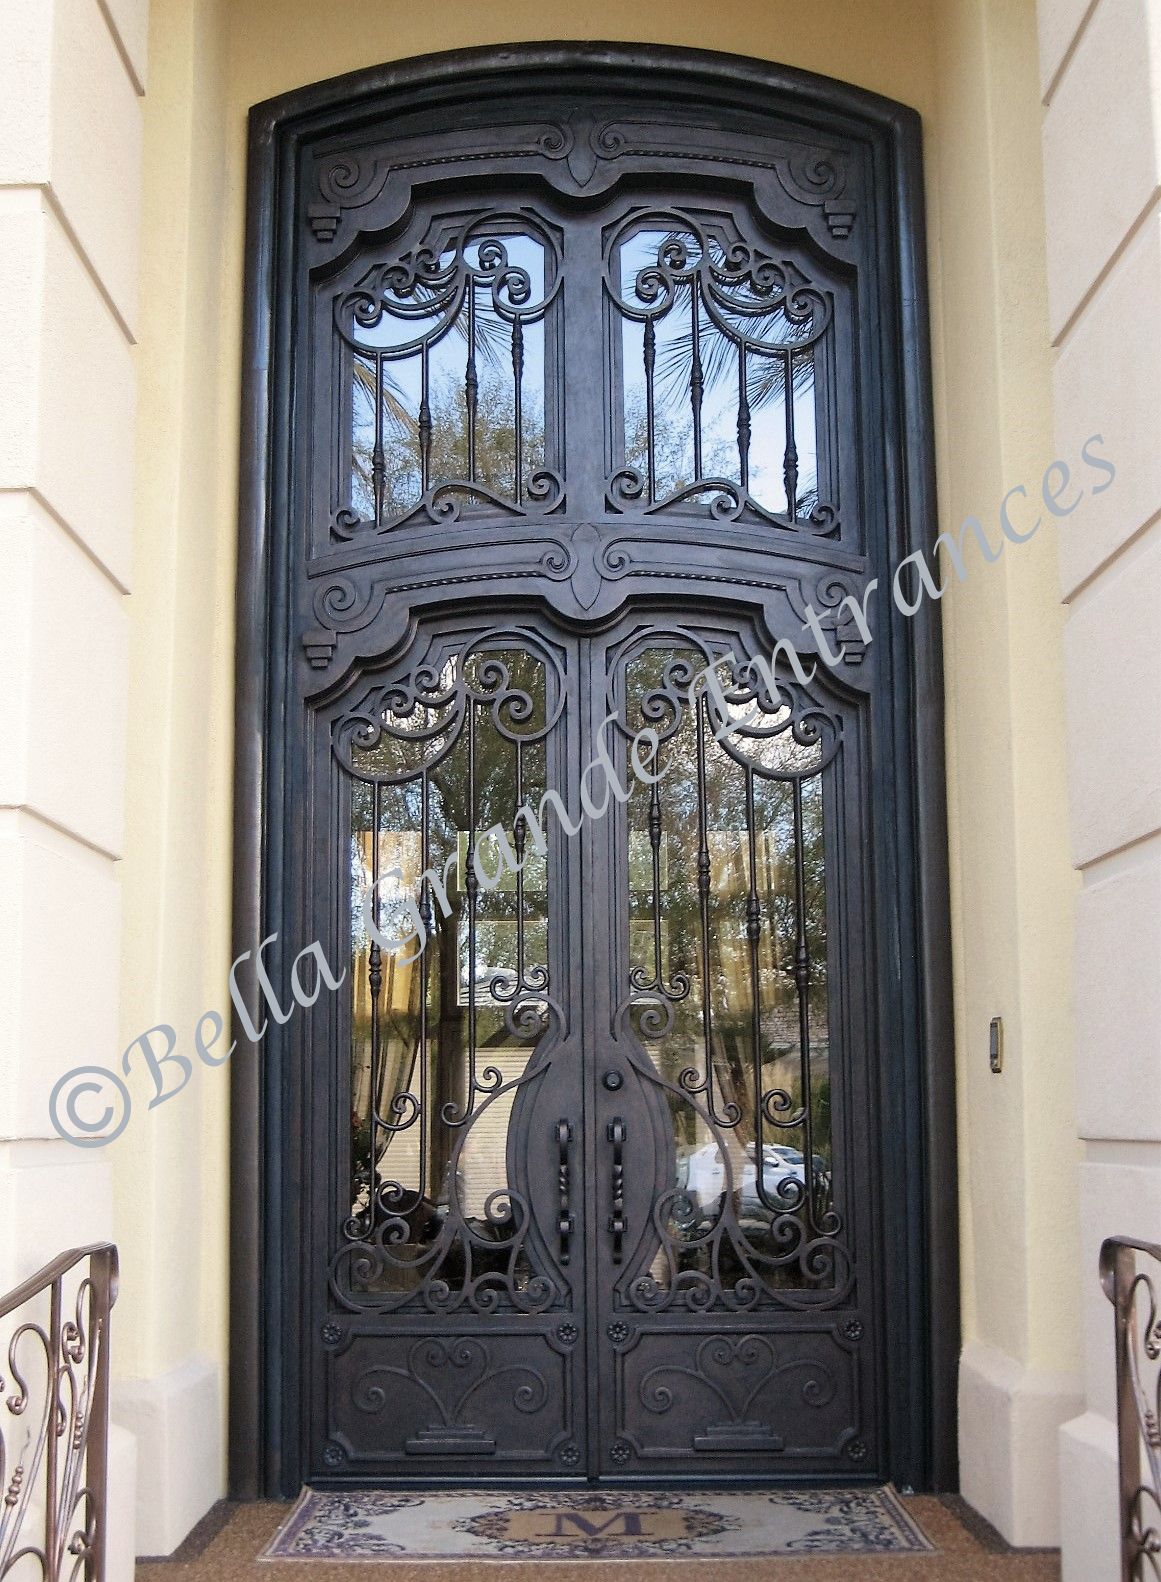 Bella Grande Entrances has crafted a magnificent iron door for a grand entrance in Las Vegas. This tall and elegant door features a twisted pull, inner glass, and a large iron grill at the top. A true masterpiece of craftsmanship.